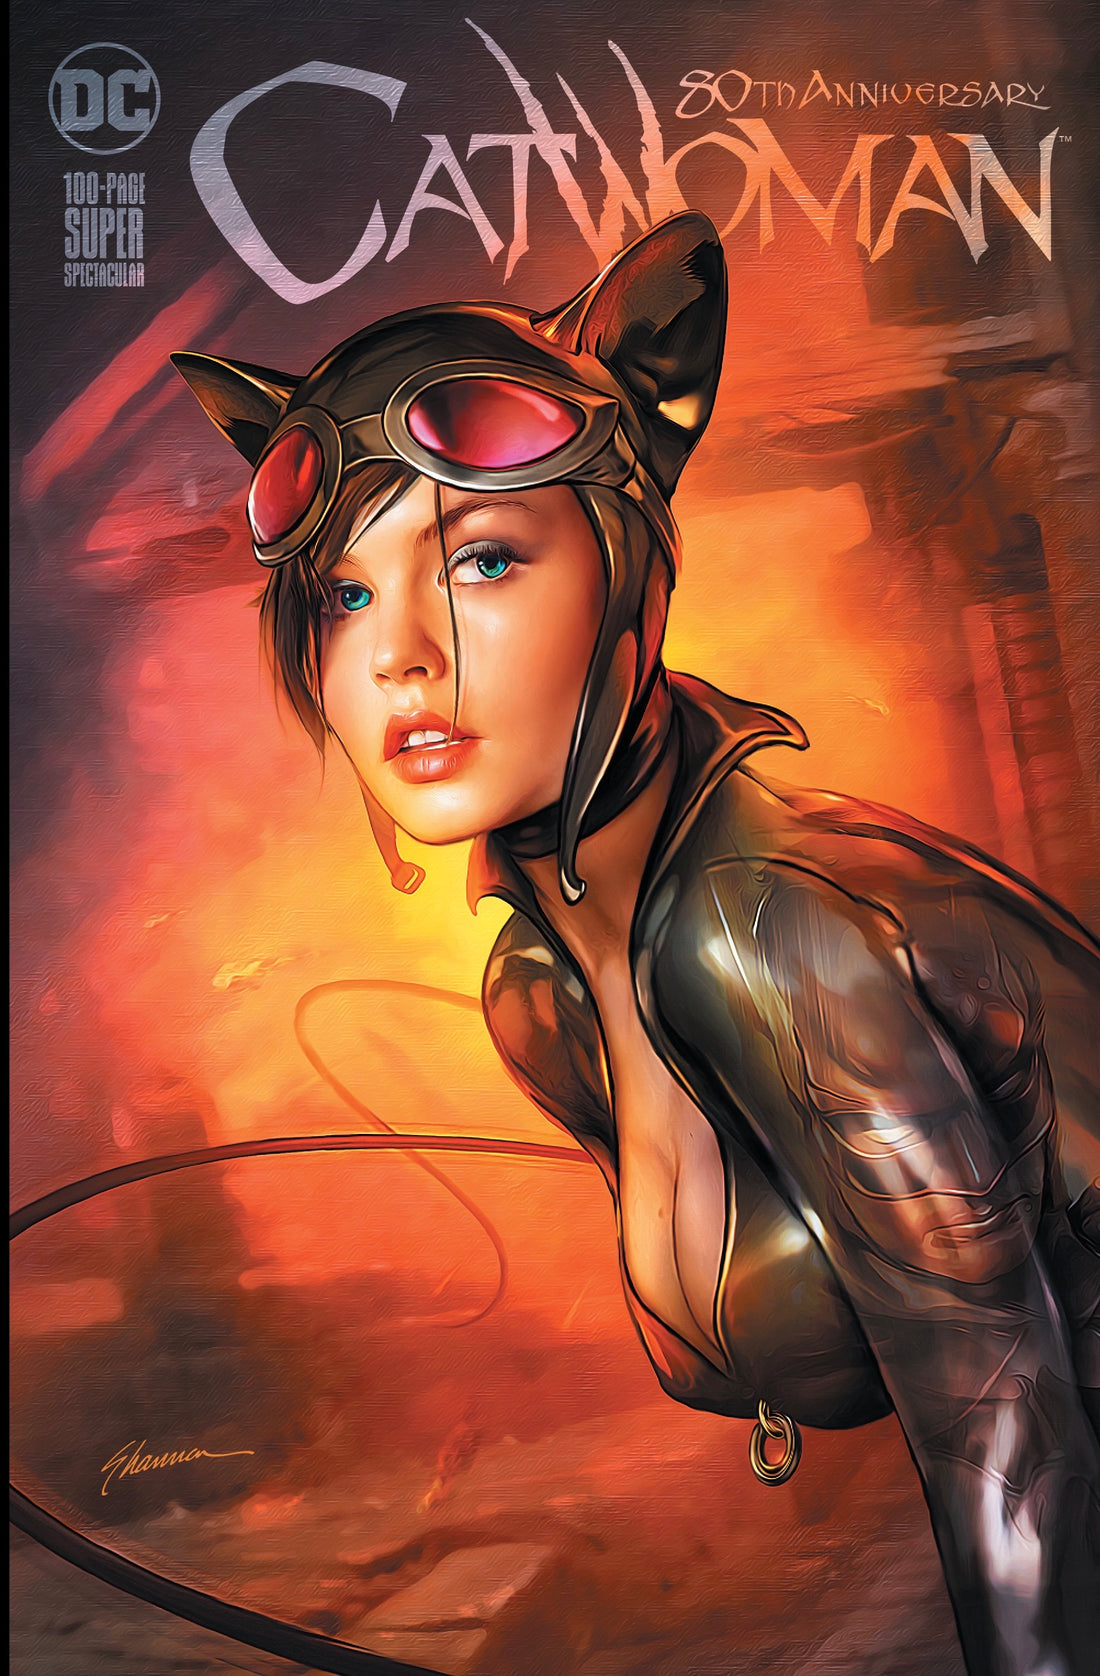 CATWOMAN 80TH ANNIVERSARY SHANNON MAER VARIANT LIMITED TO 2000 COPIES